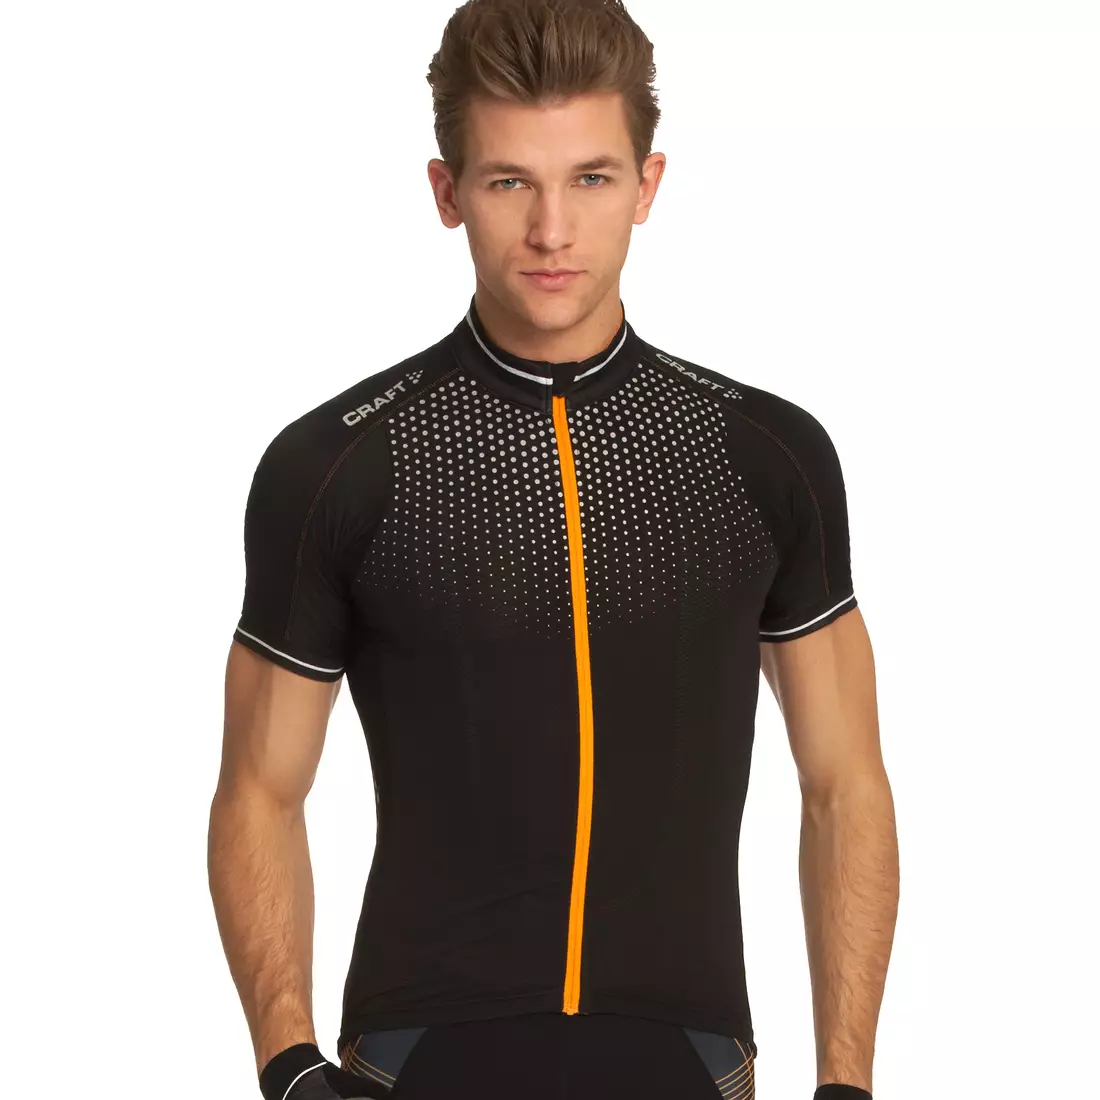 CRAFT Performance Glow men's cycling jersey 1902581-9560